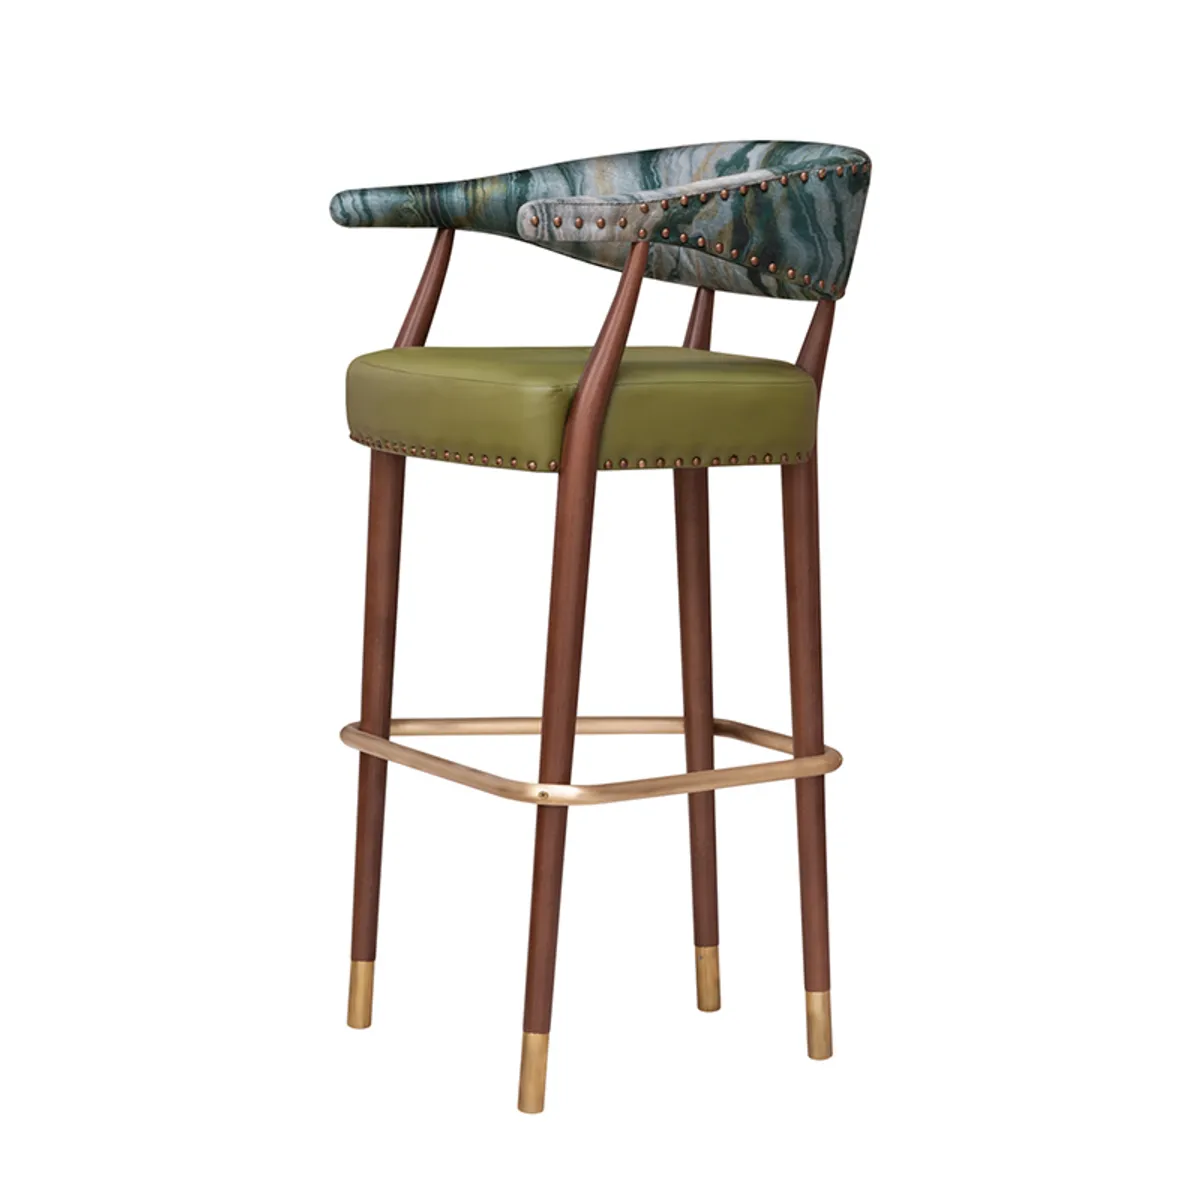 Clara Bar Stool Furniture For Bars With Stud Detailing And Metal Slipper Cups On Wooden Legs 0985